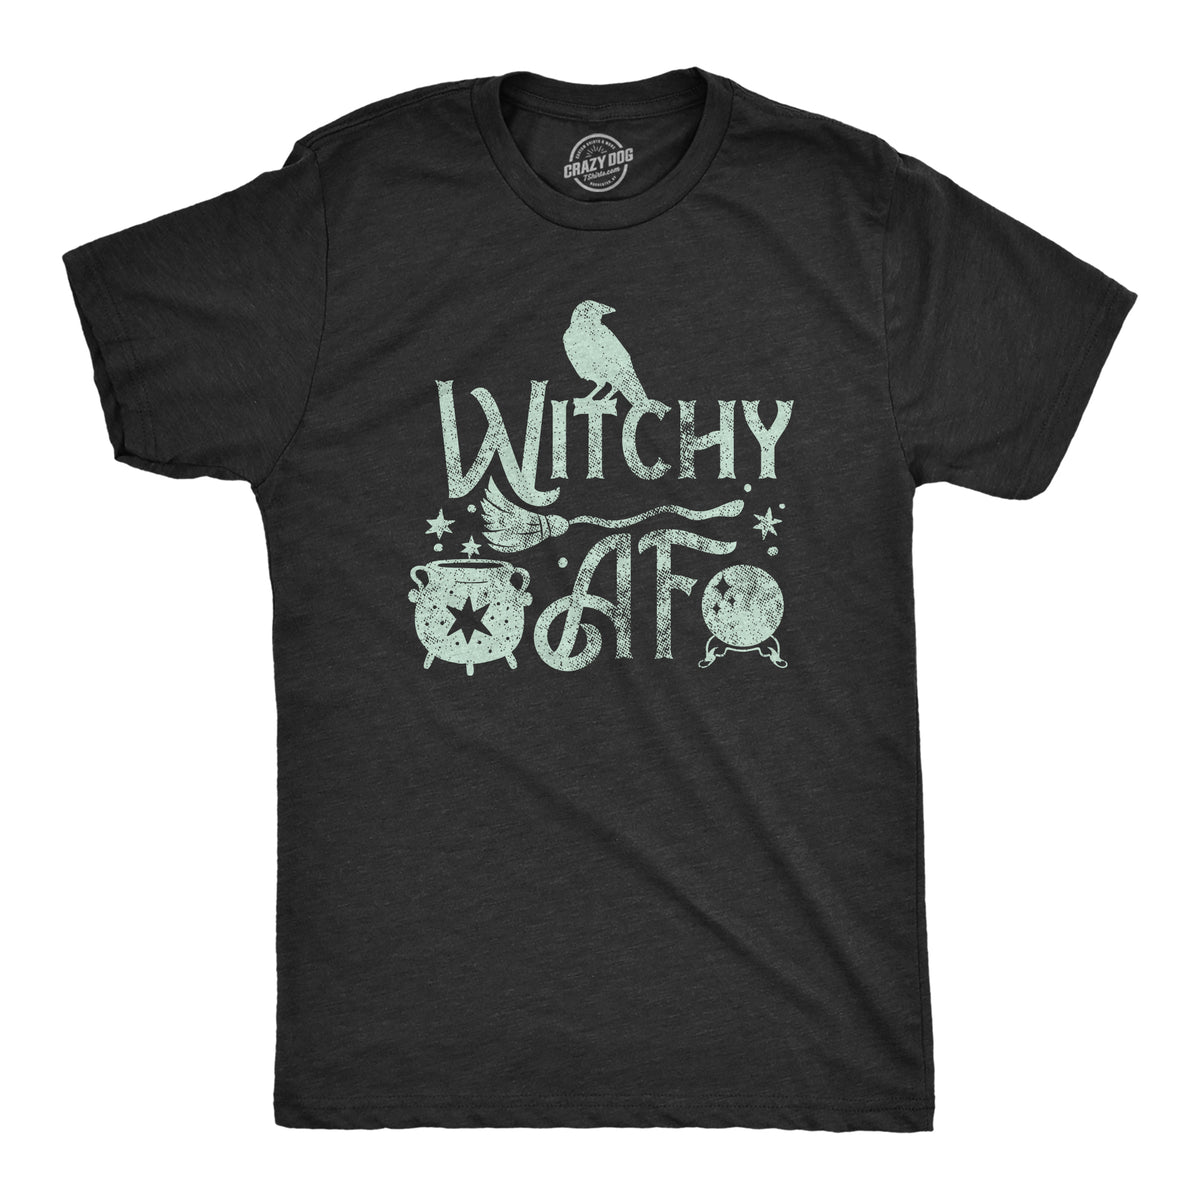 Funny Heather Black - WITCHY Witchy AF Mens T Shirt Nerdy halloween Tee